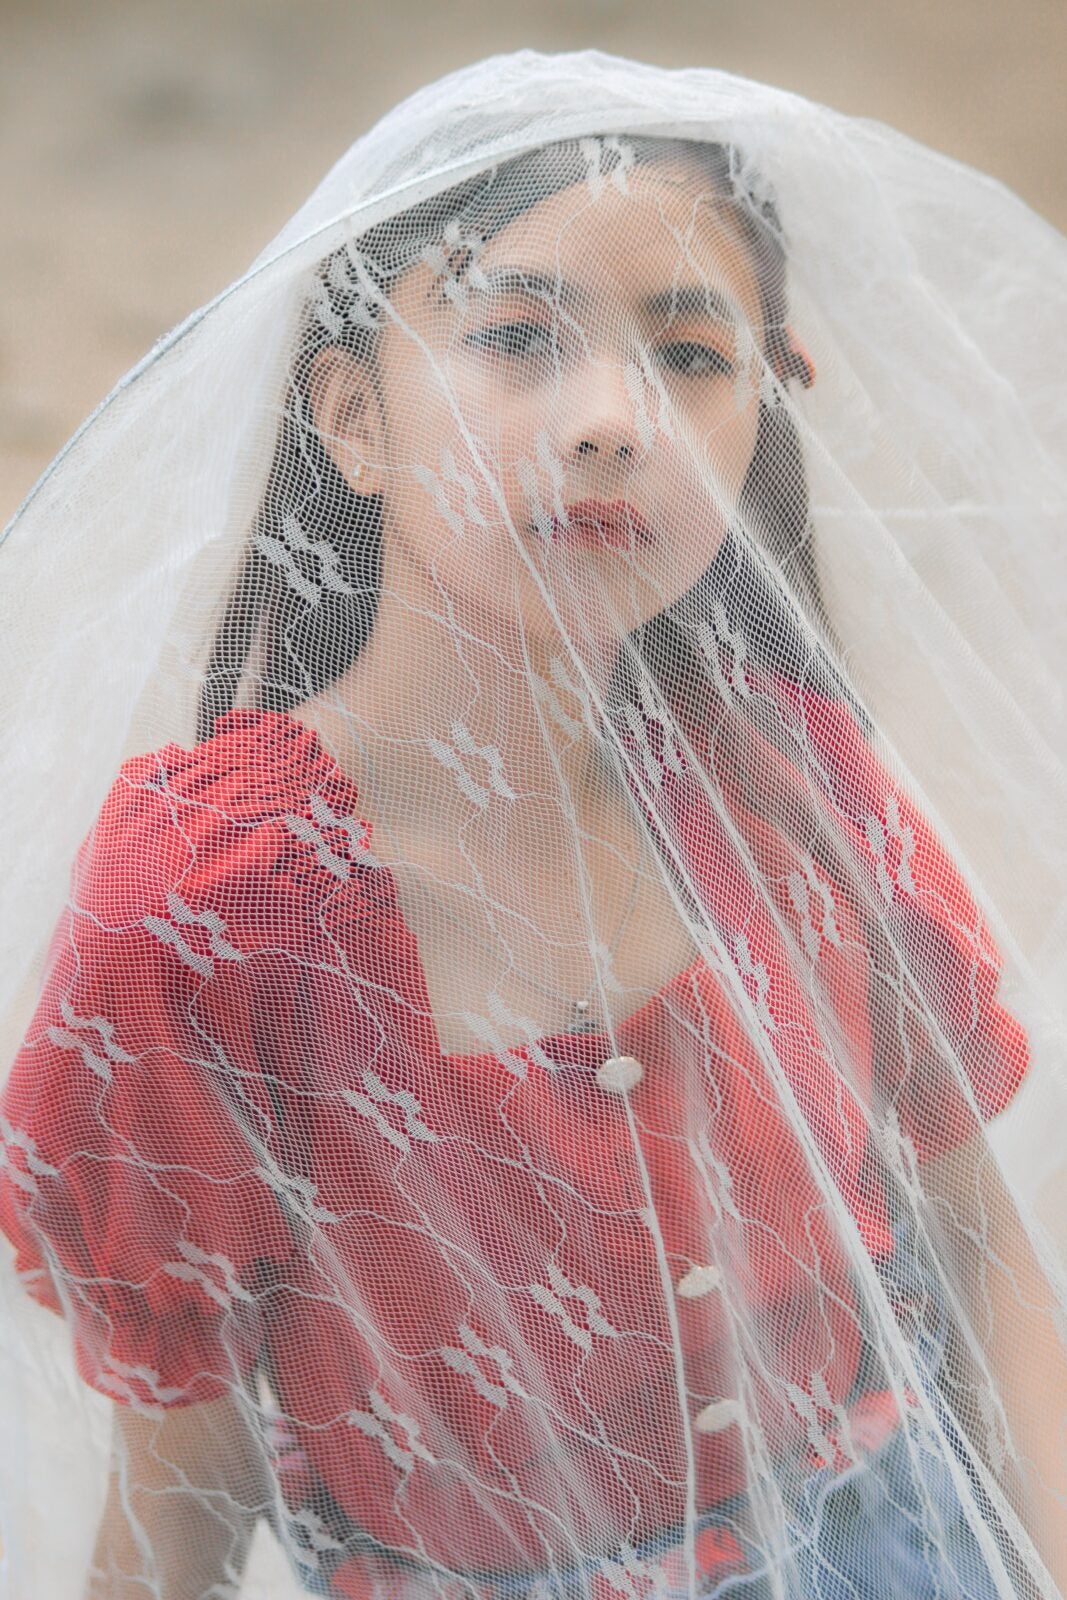 A young girl in red poses with a white veil covering her face and body.